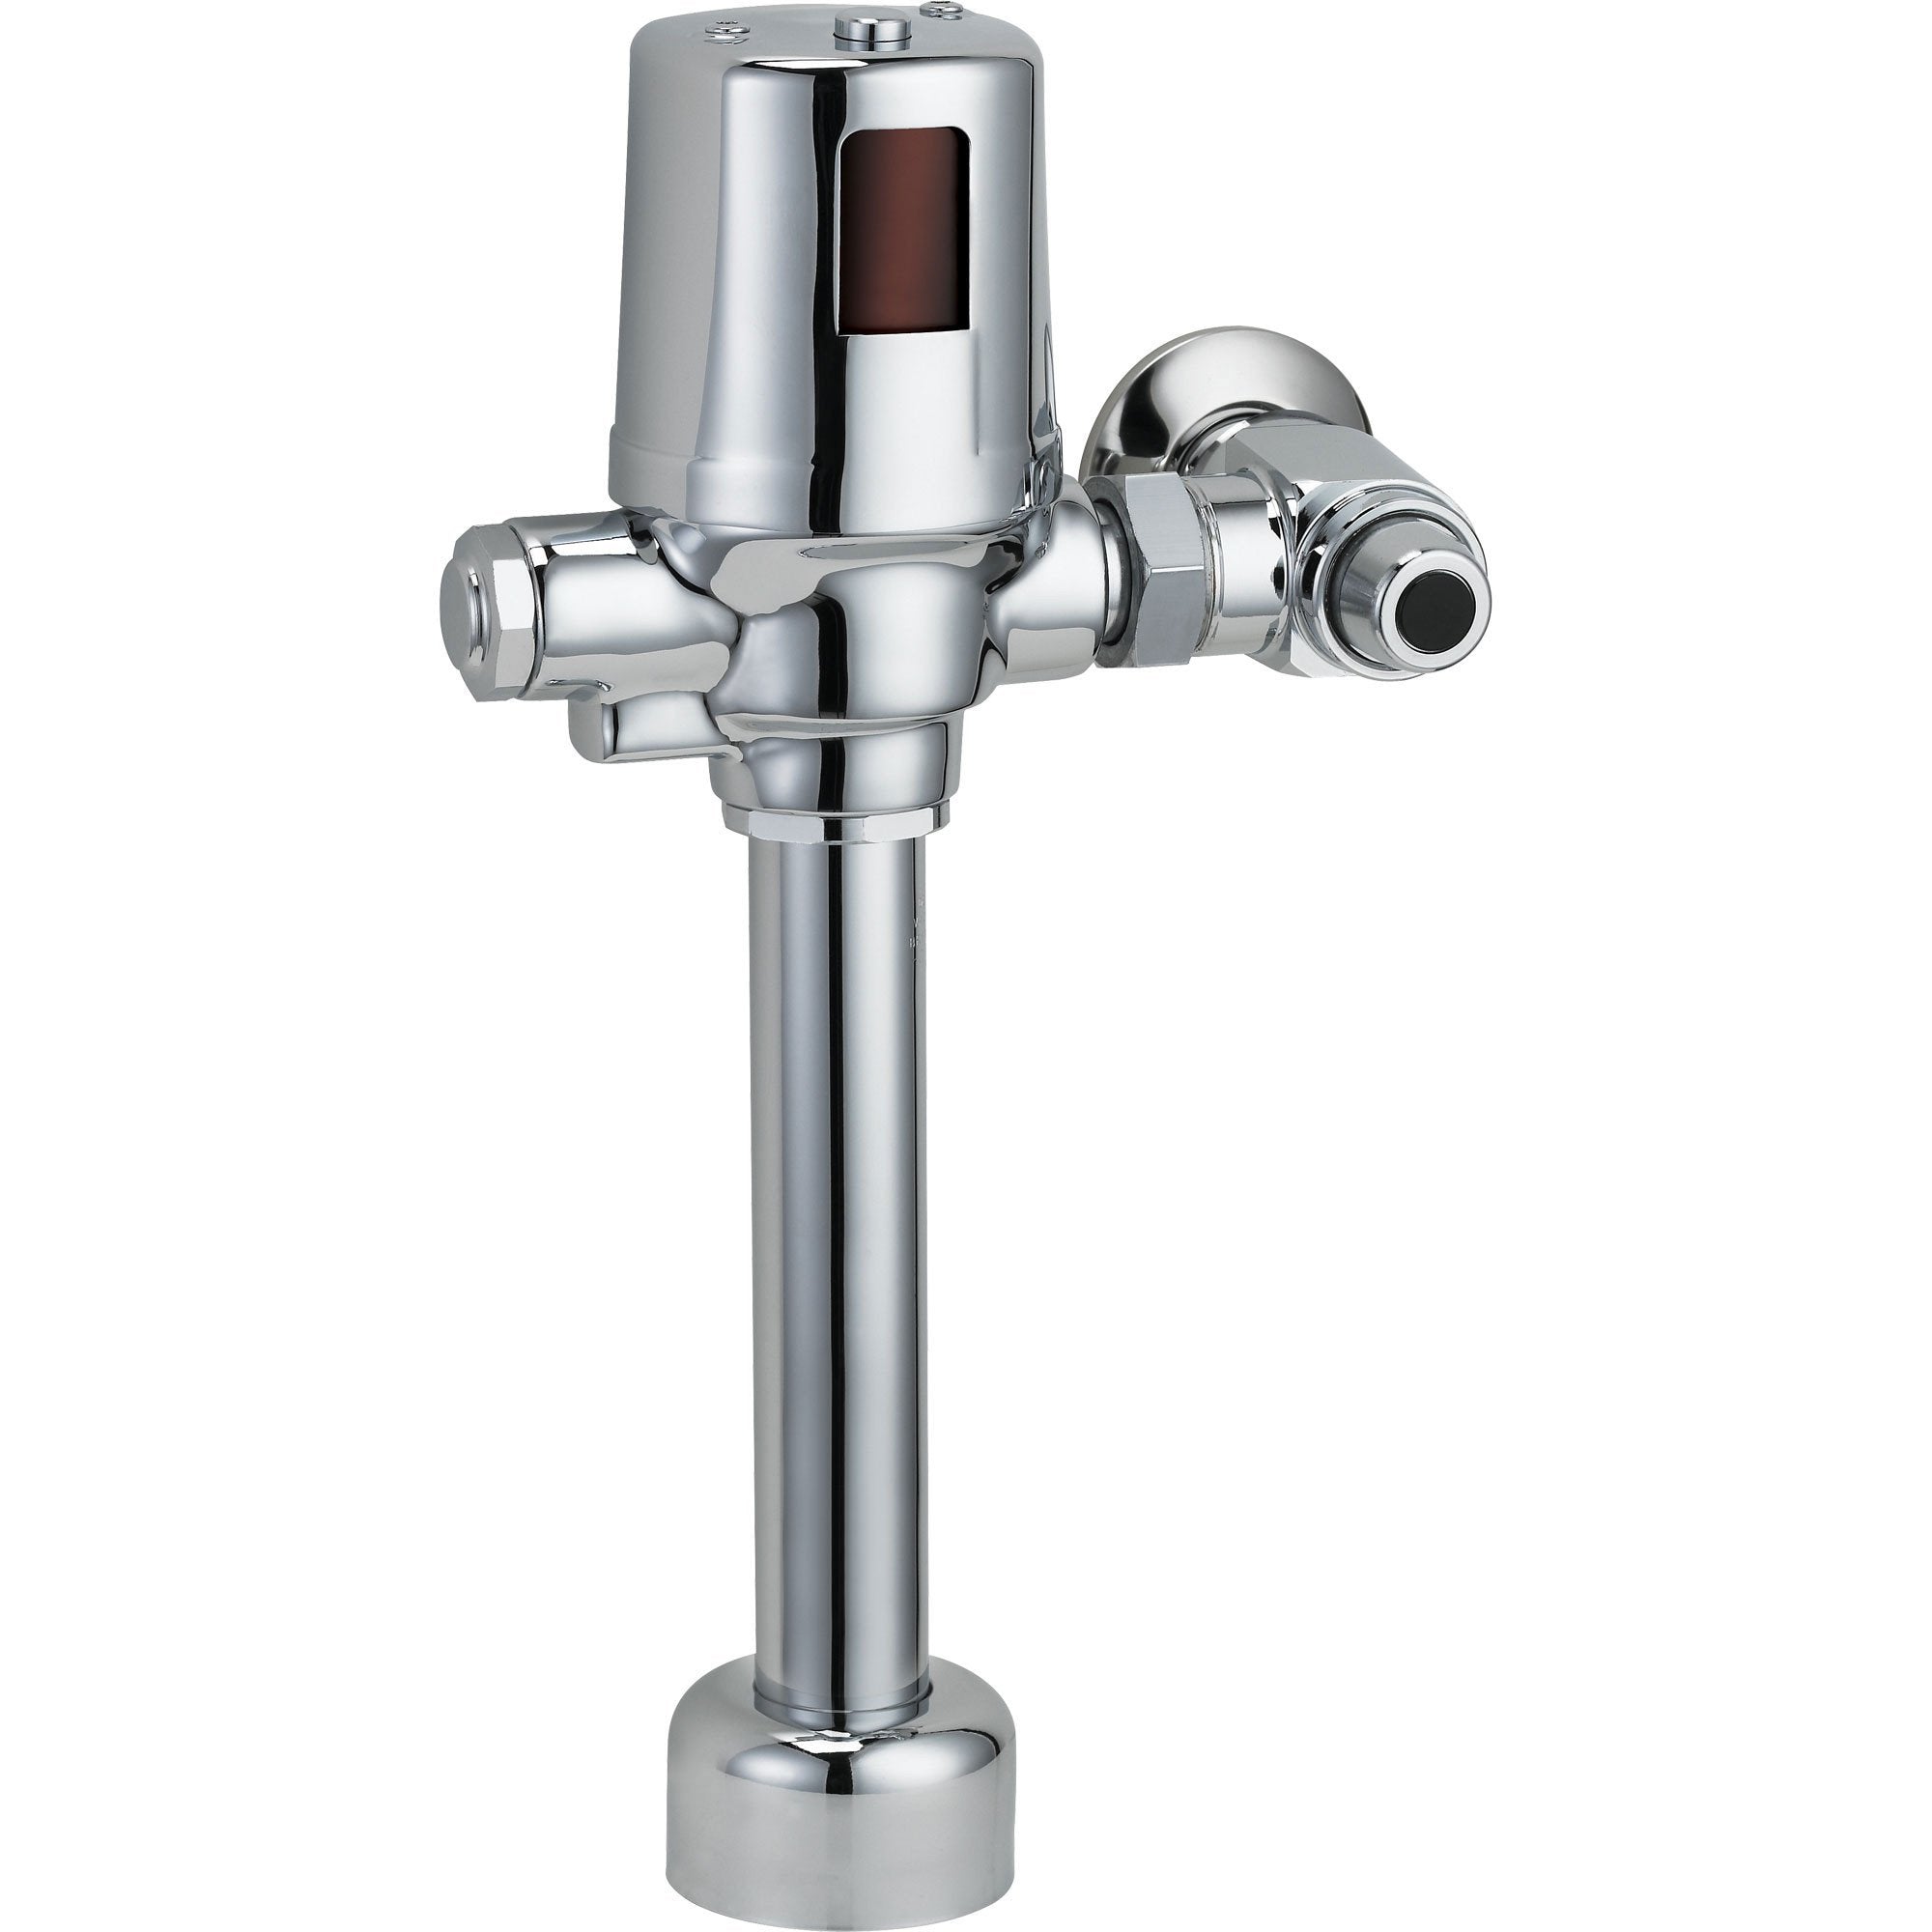 Delta Commercial Exposed Hardware-Operated Flush Valve in Chrome 608659